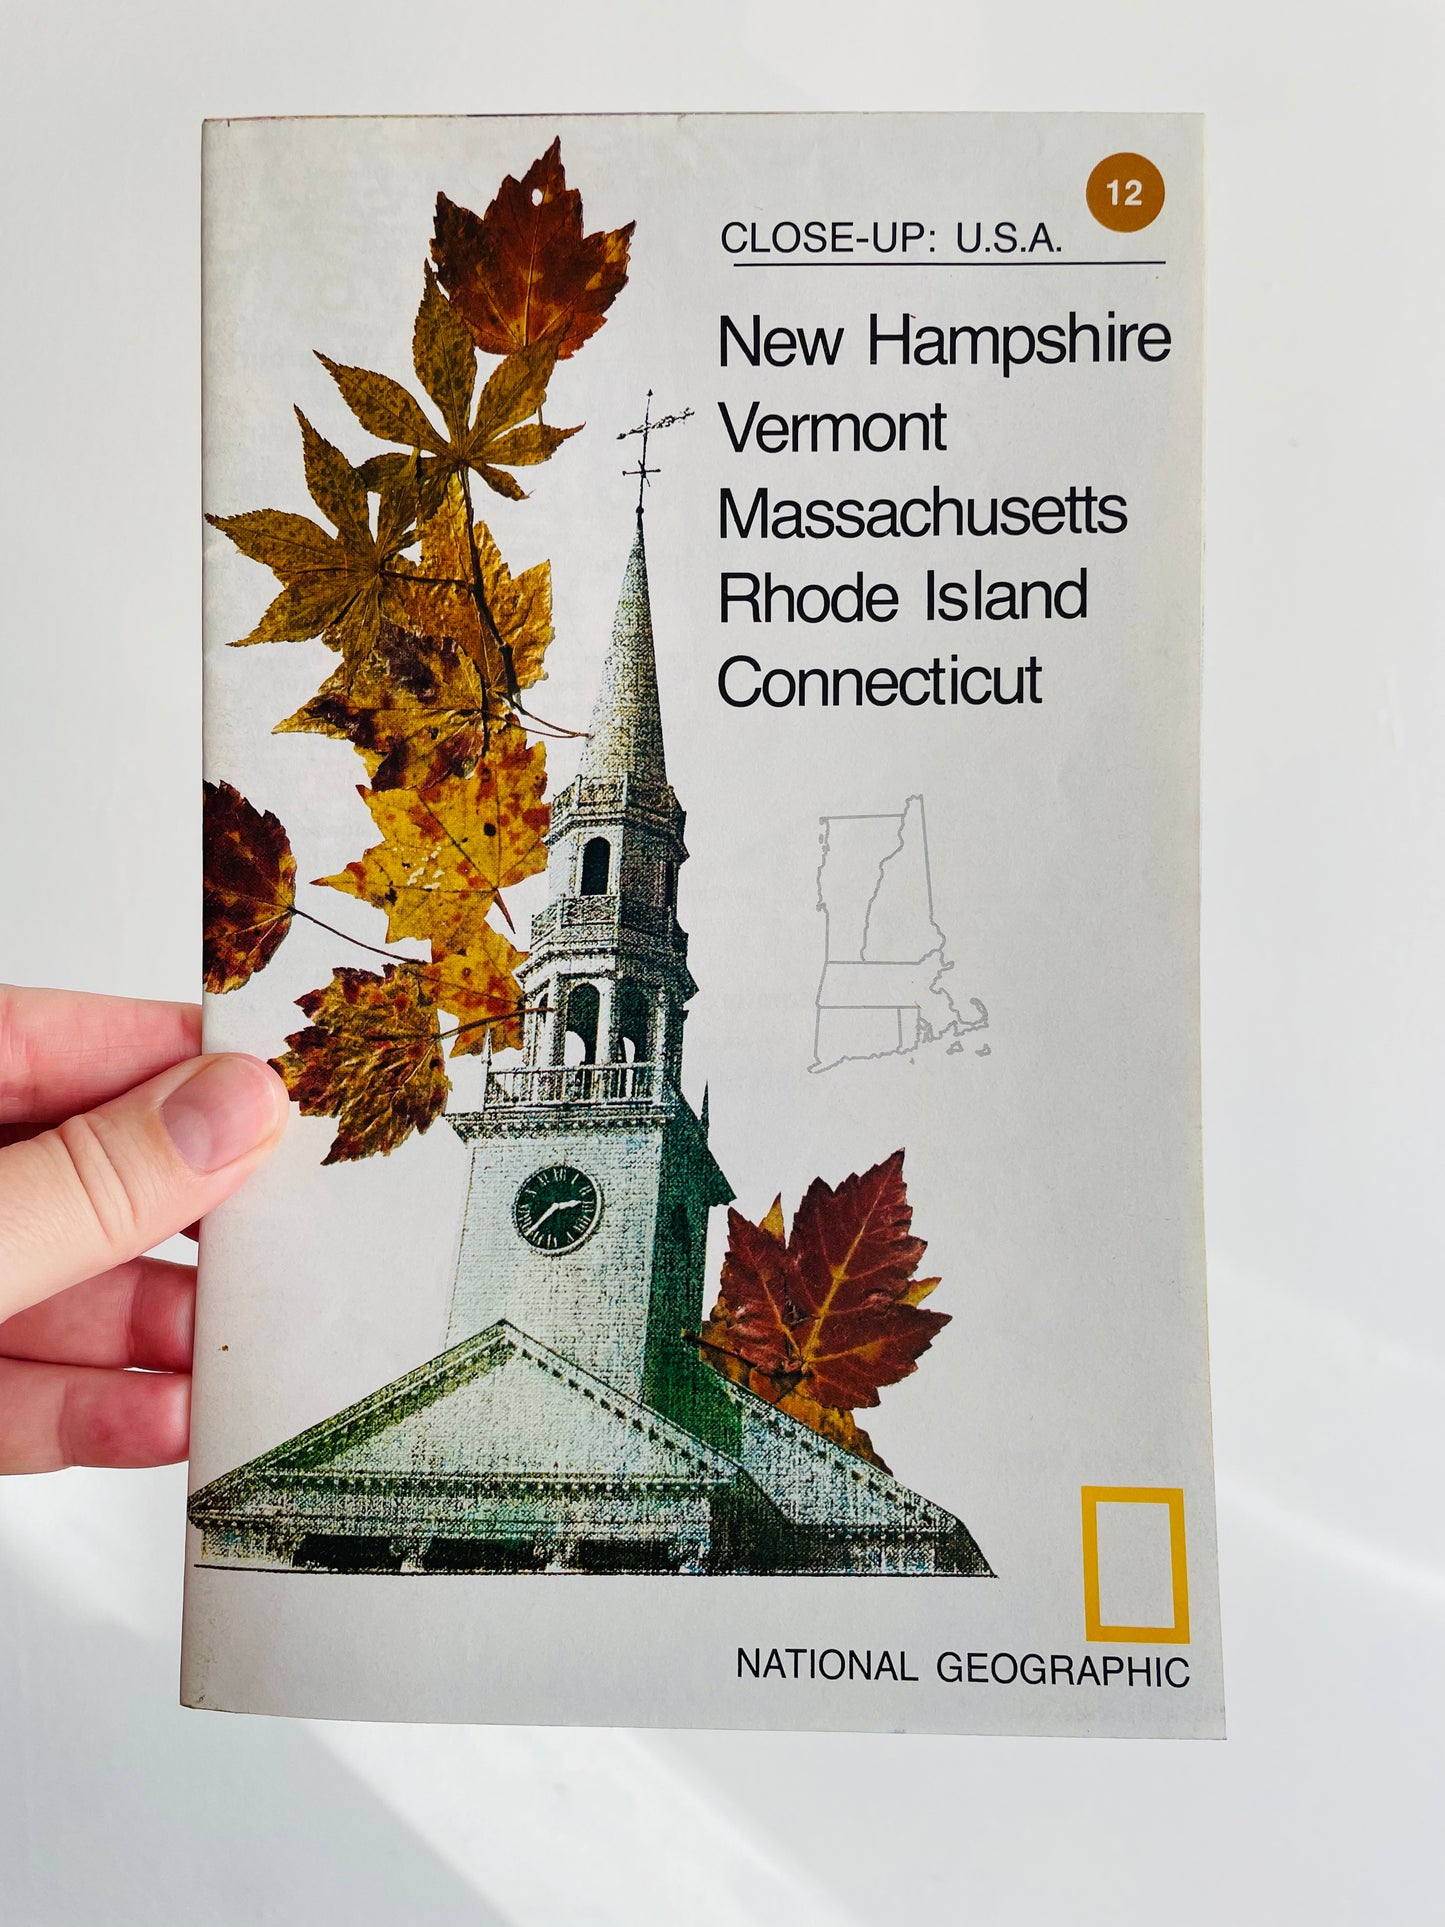 1978 National Geographic Close-Up USA Map - New Hampshire, Vermont, Massachusetts, Rhode Island, Connecticut